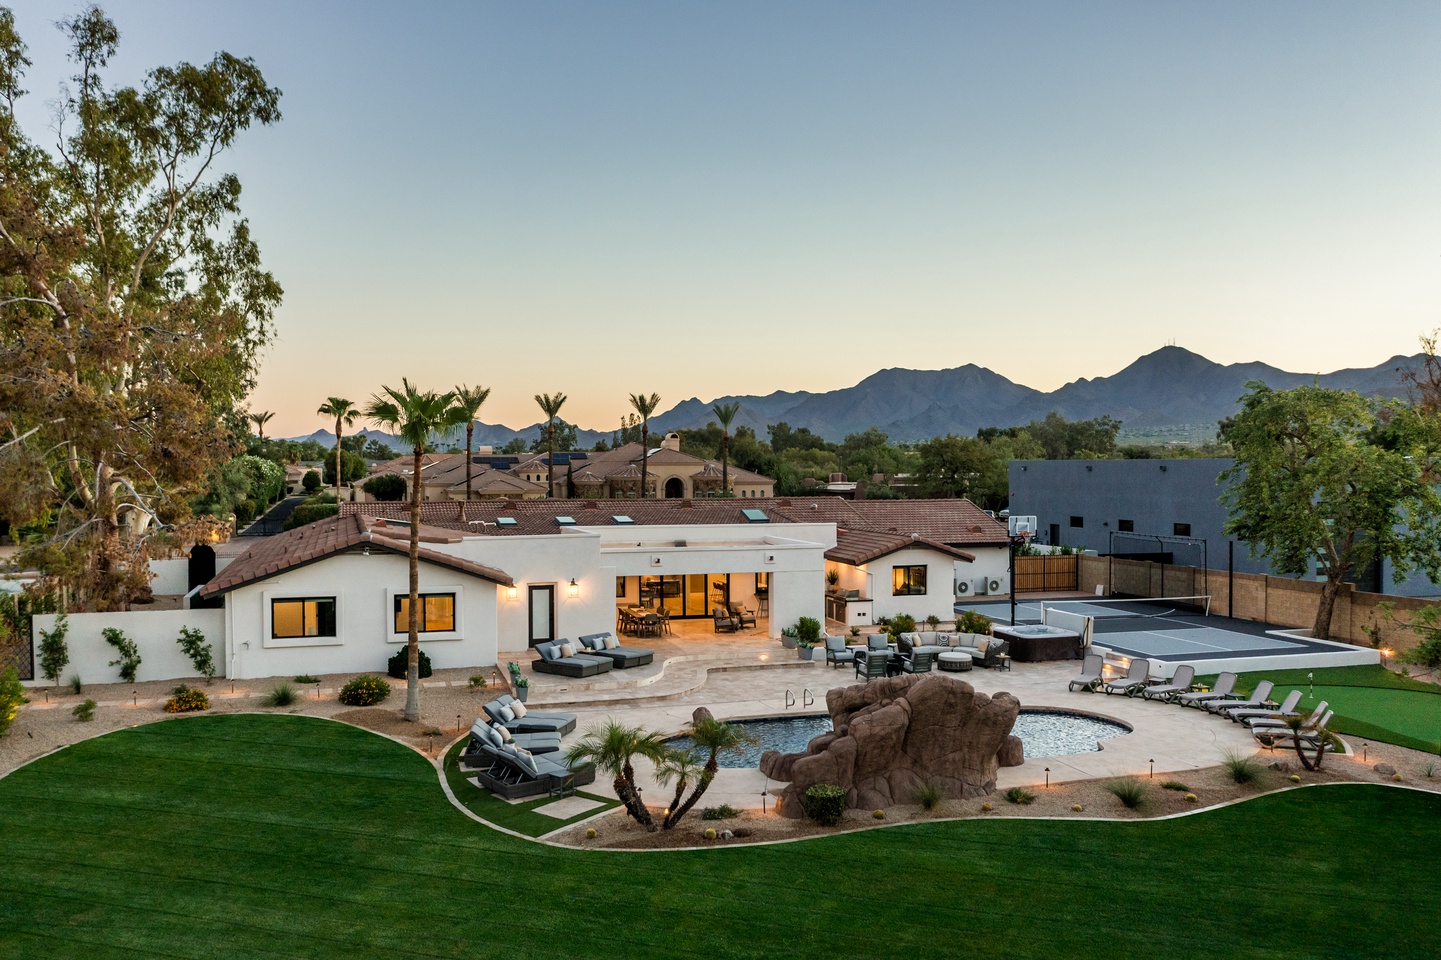 Centrally located in the heart of Scottsdale